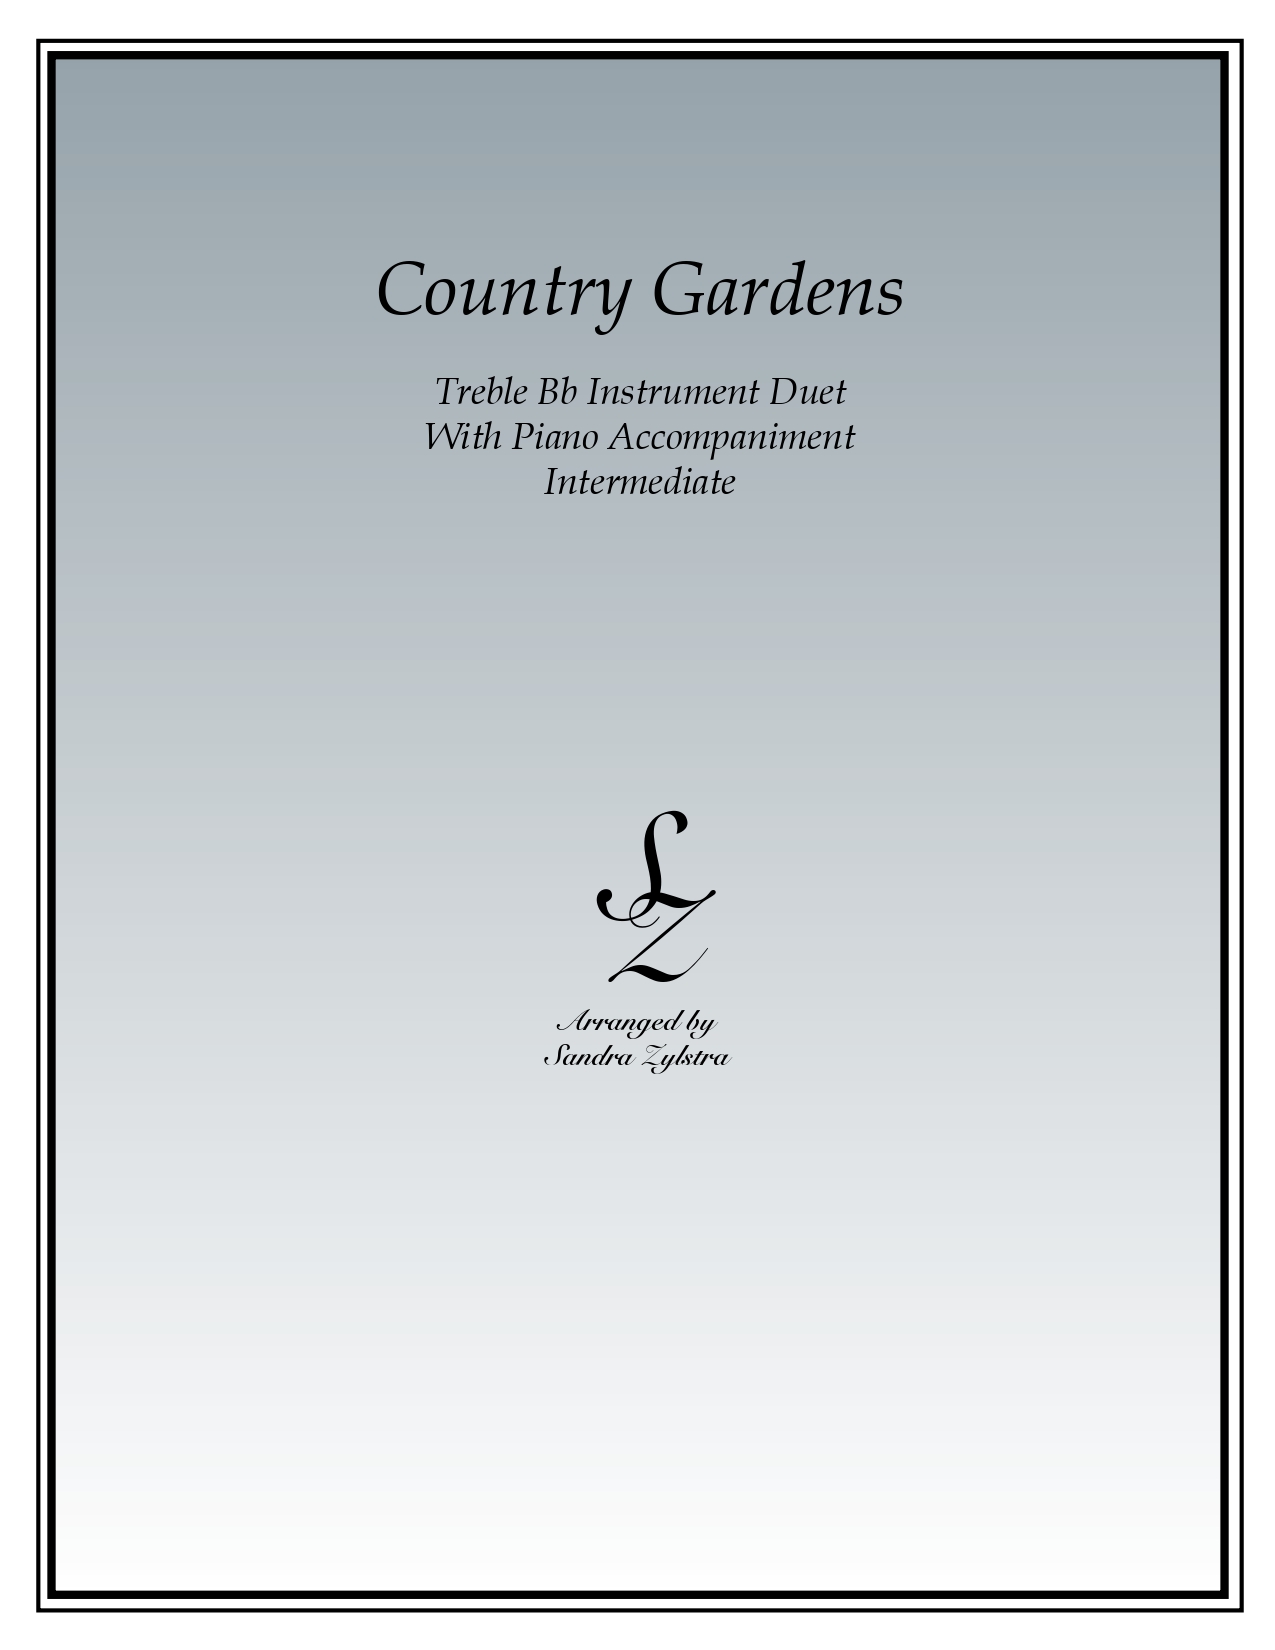 Country Gardens Bb instrument duet parts cover page 00011